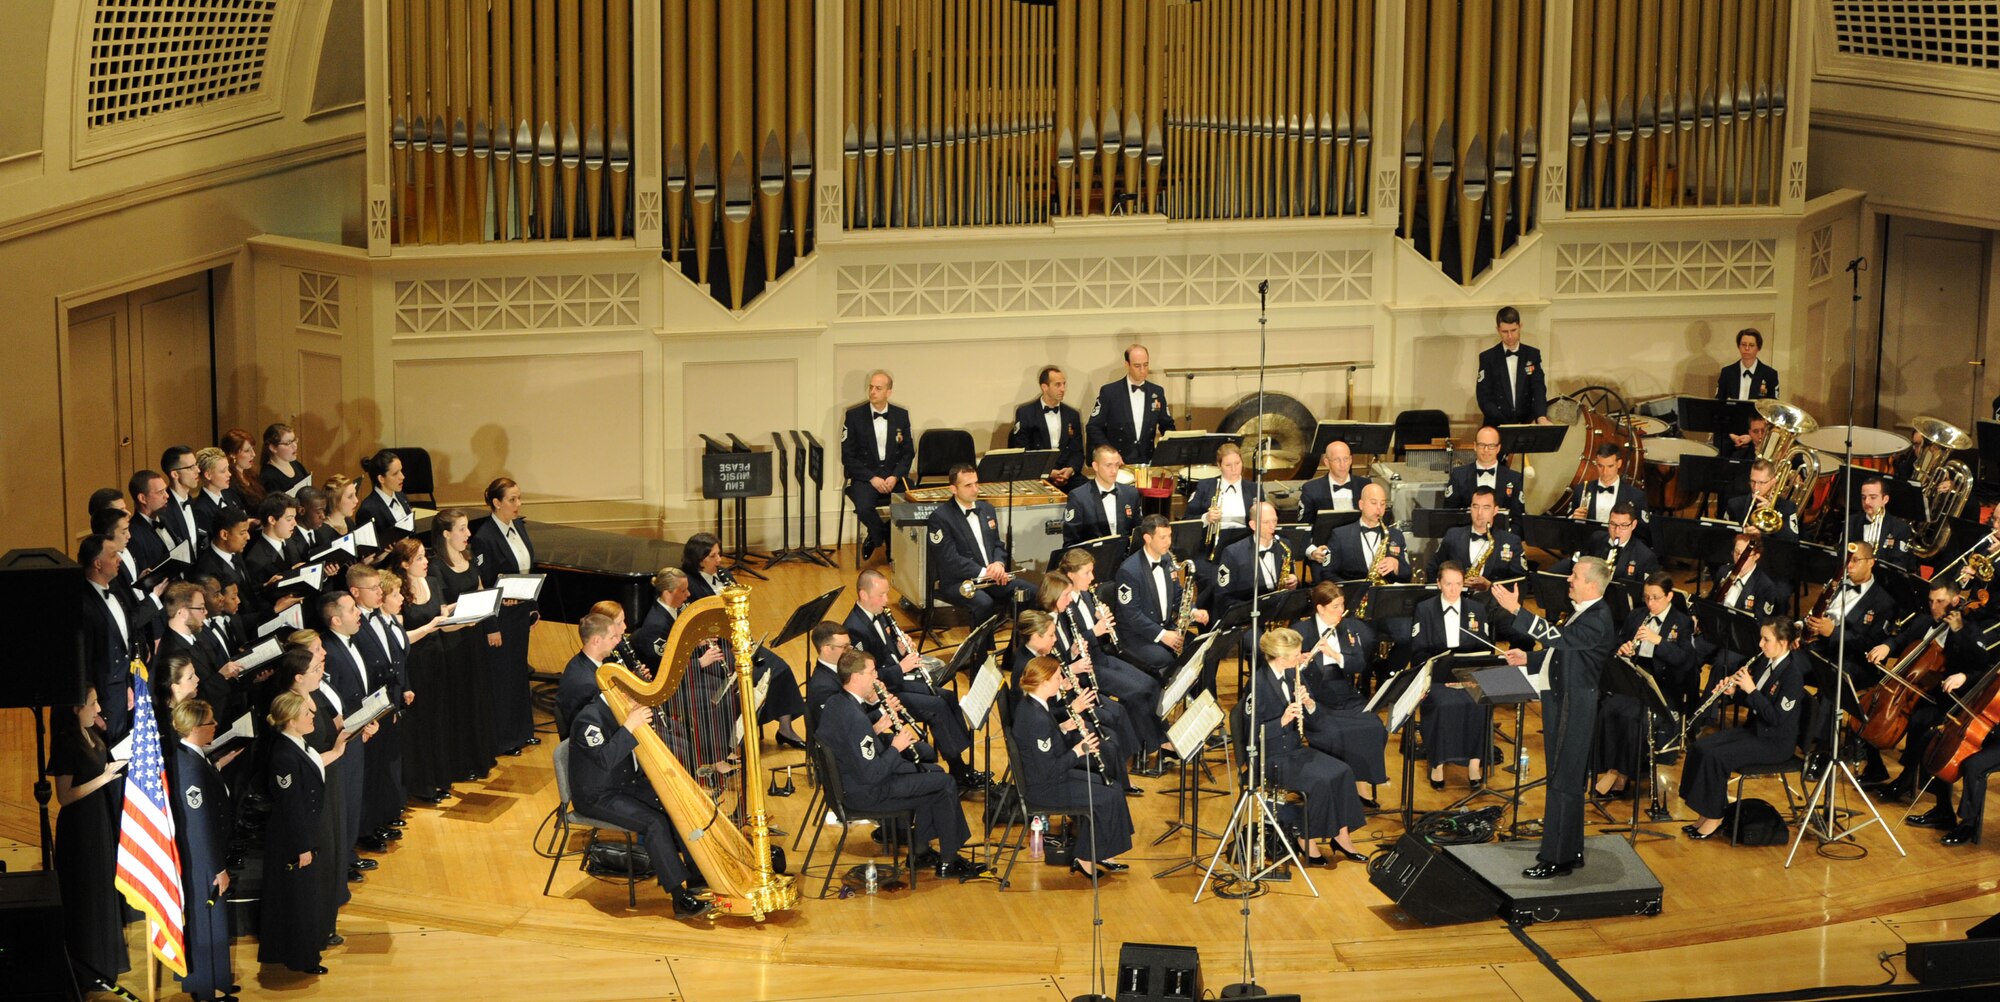 Col. Larry Lang conducts Eastern Michigan University students
along with the Concert Band and Singing Sergeants during a performance at EMU in Ypsilanti, Mich., on April 9, 2014. These groups will perform at various venues throughout Ark., La., Miss., Tenn., and Texas on their upcoming spring tour. (U.S. Air Force photo by Master Sgt. Tammie Moore/released)